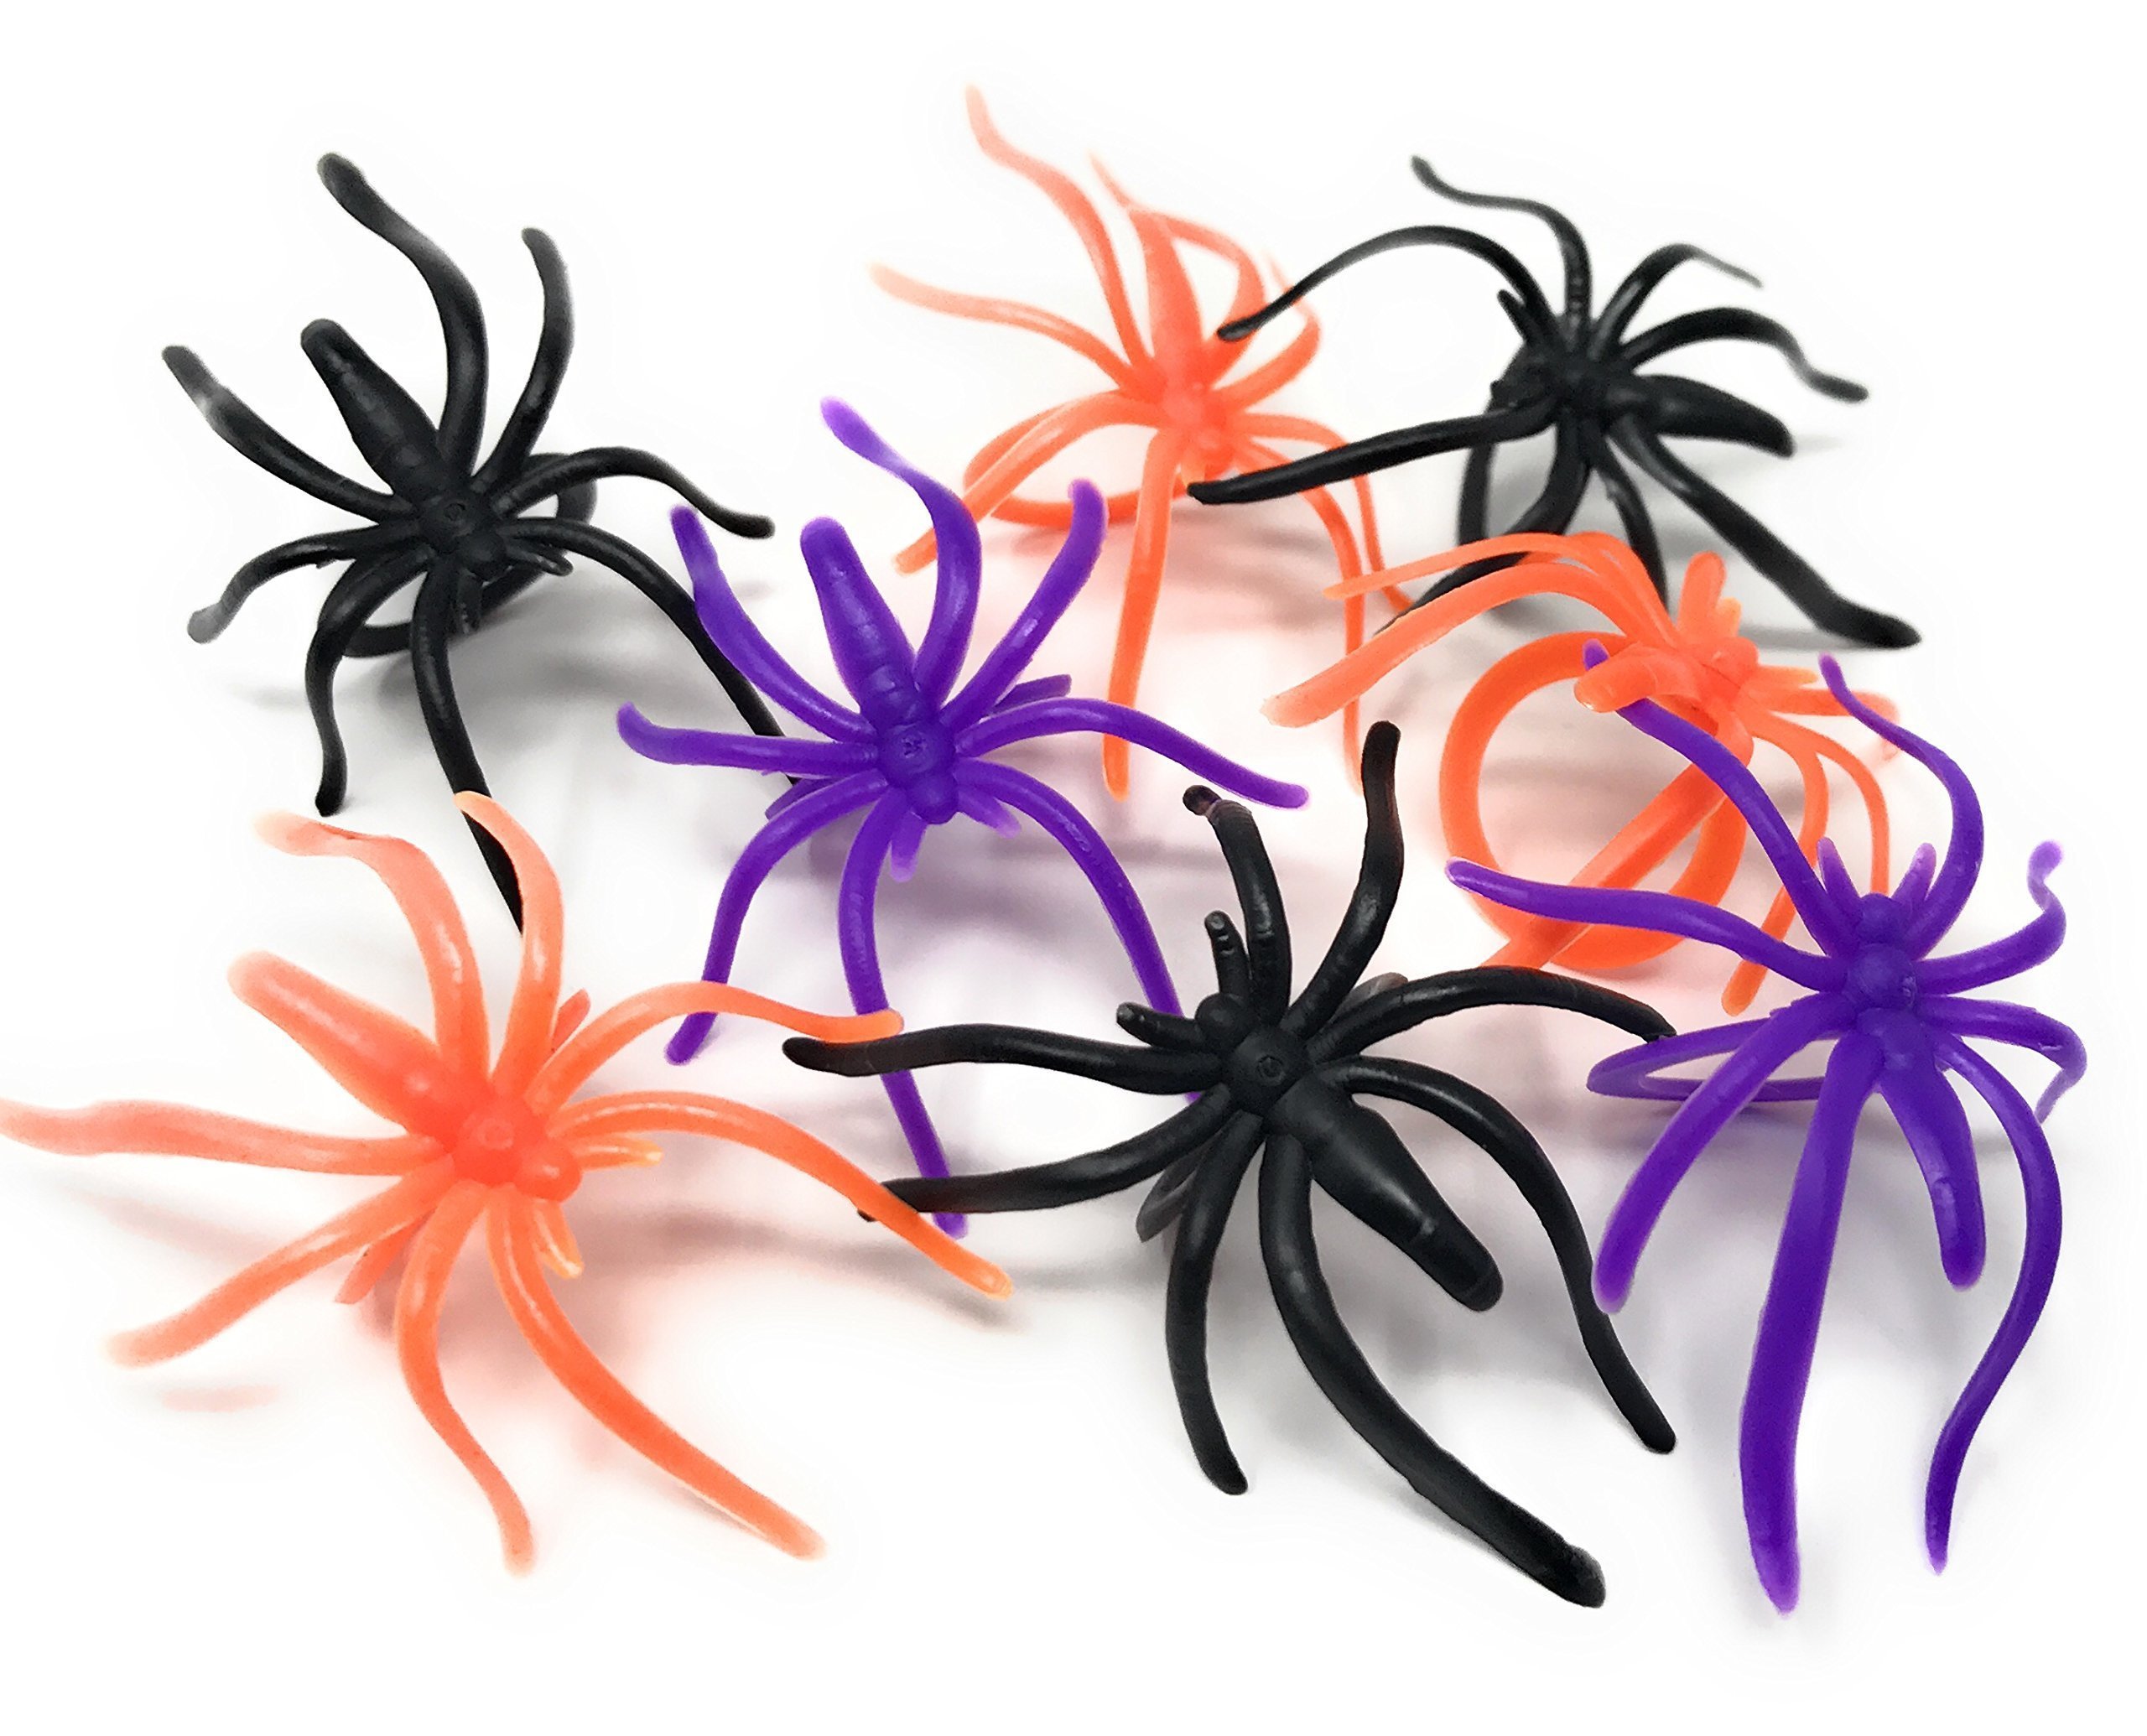 288 Bulk Halloween Spider Ring Assortment - Orange, Purple, Black, and Glow-in-the-Dark Creepy Crawly Party Favors, Treats, and Cupcake Toppers